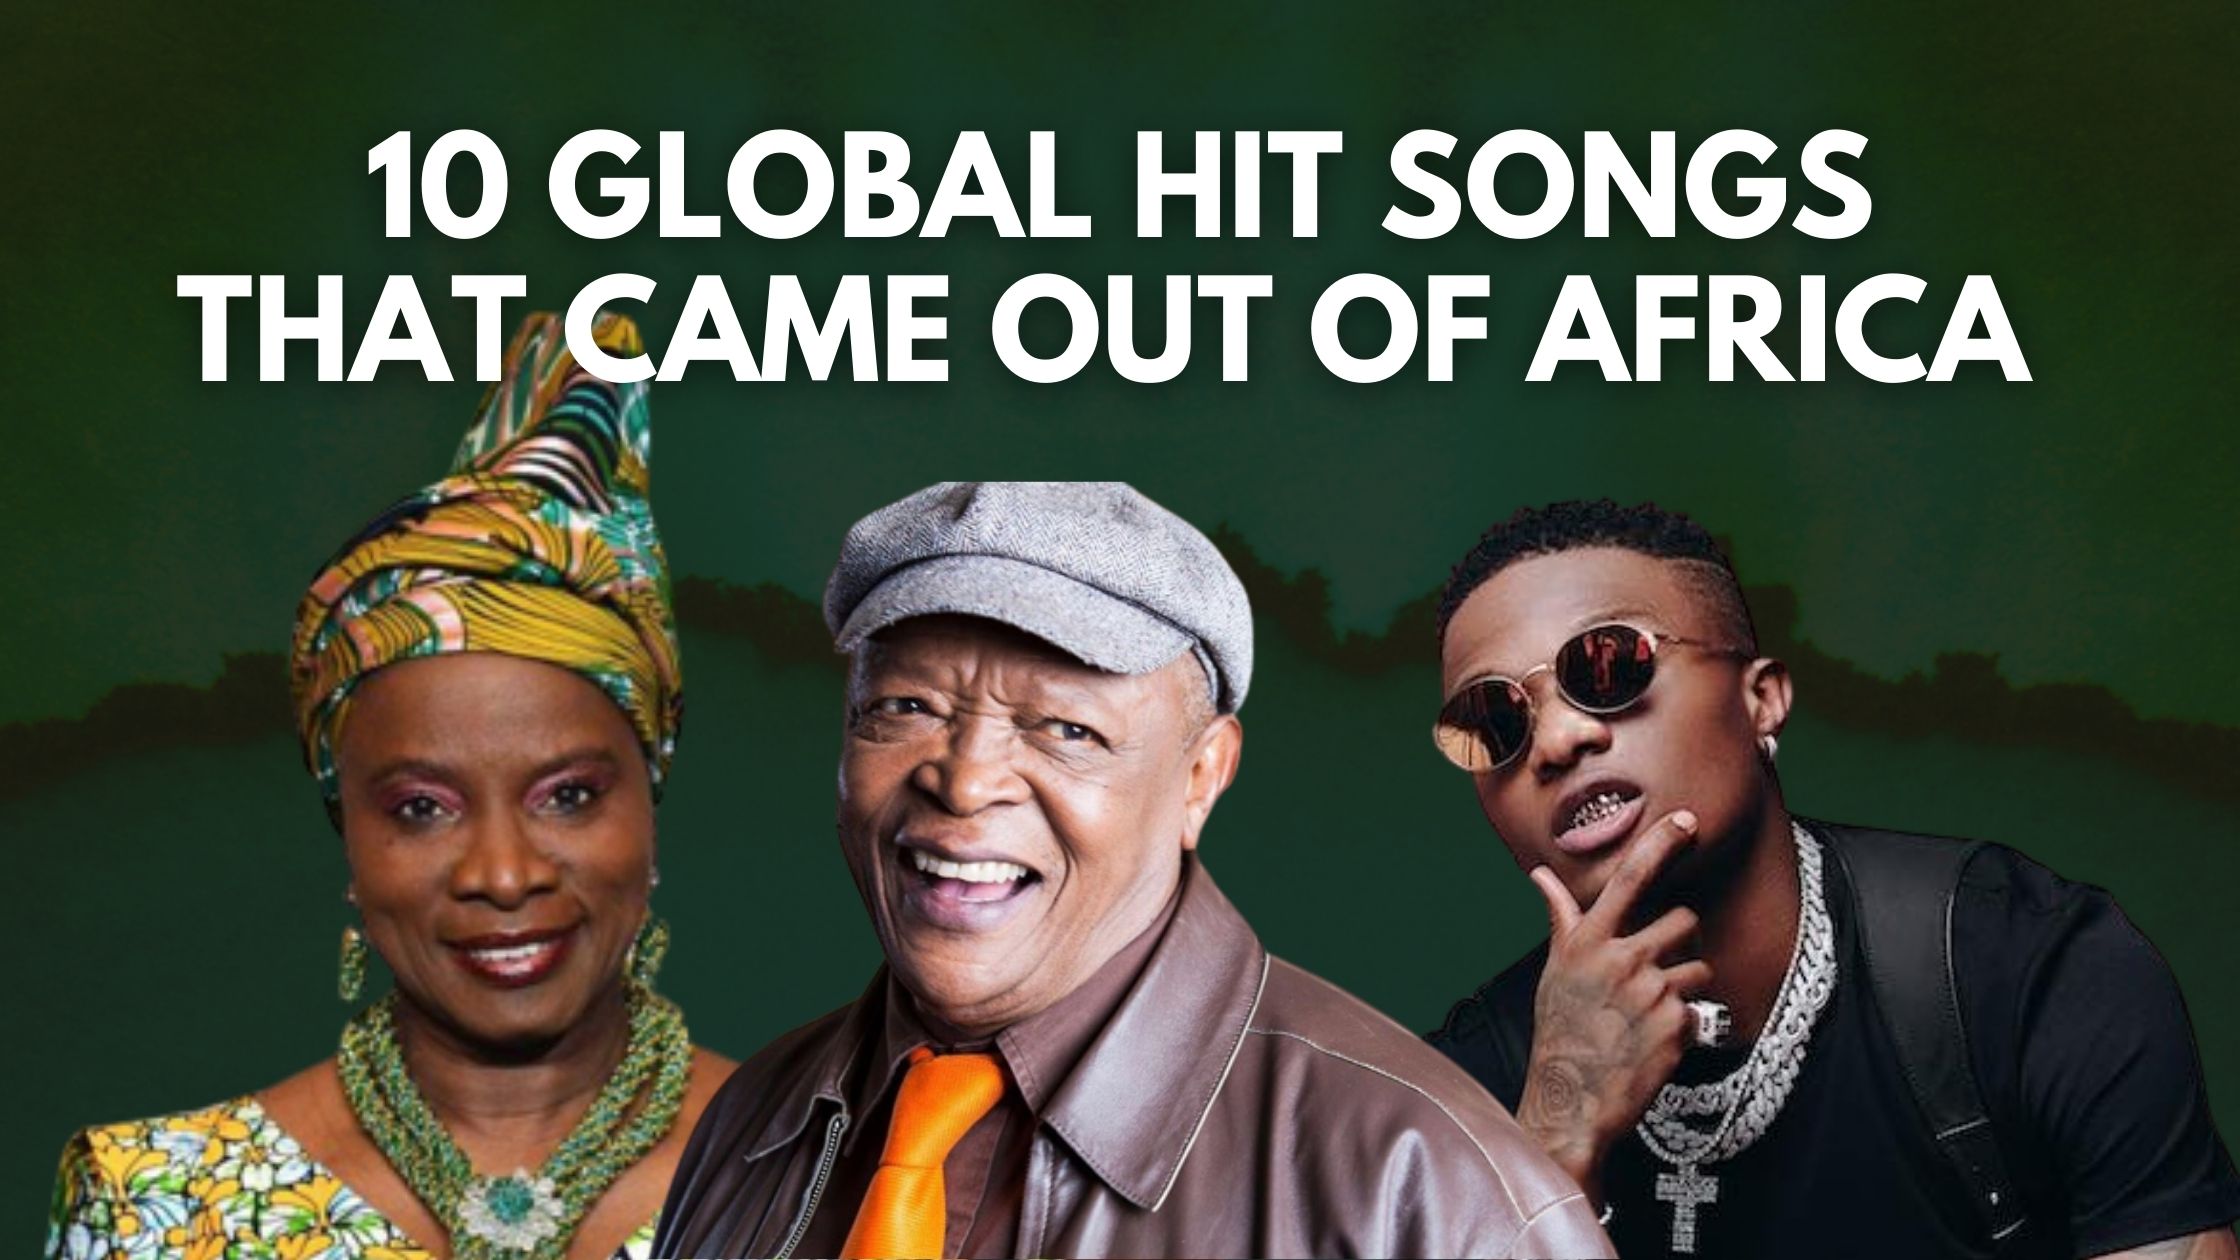 10 Global Hit Songs That Came out of Africa